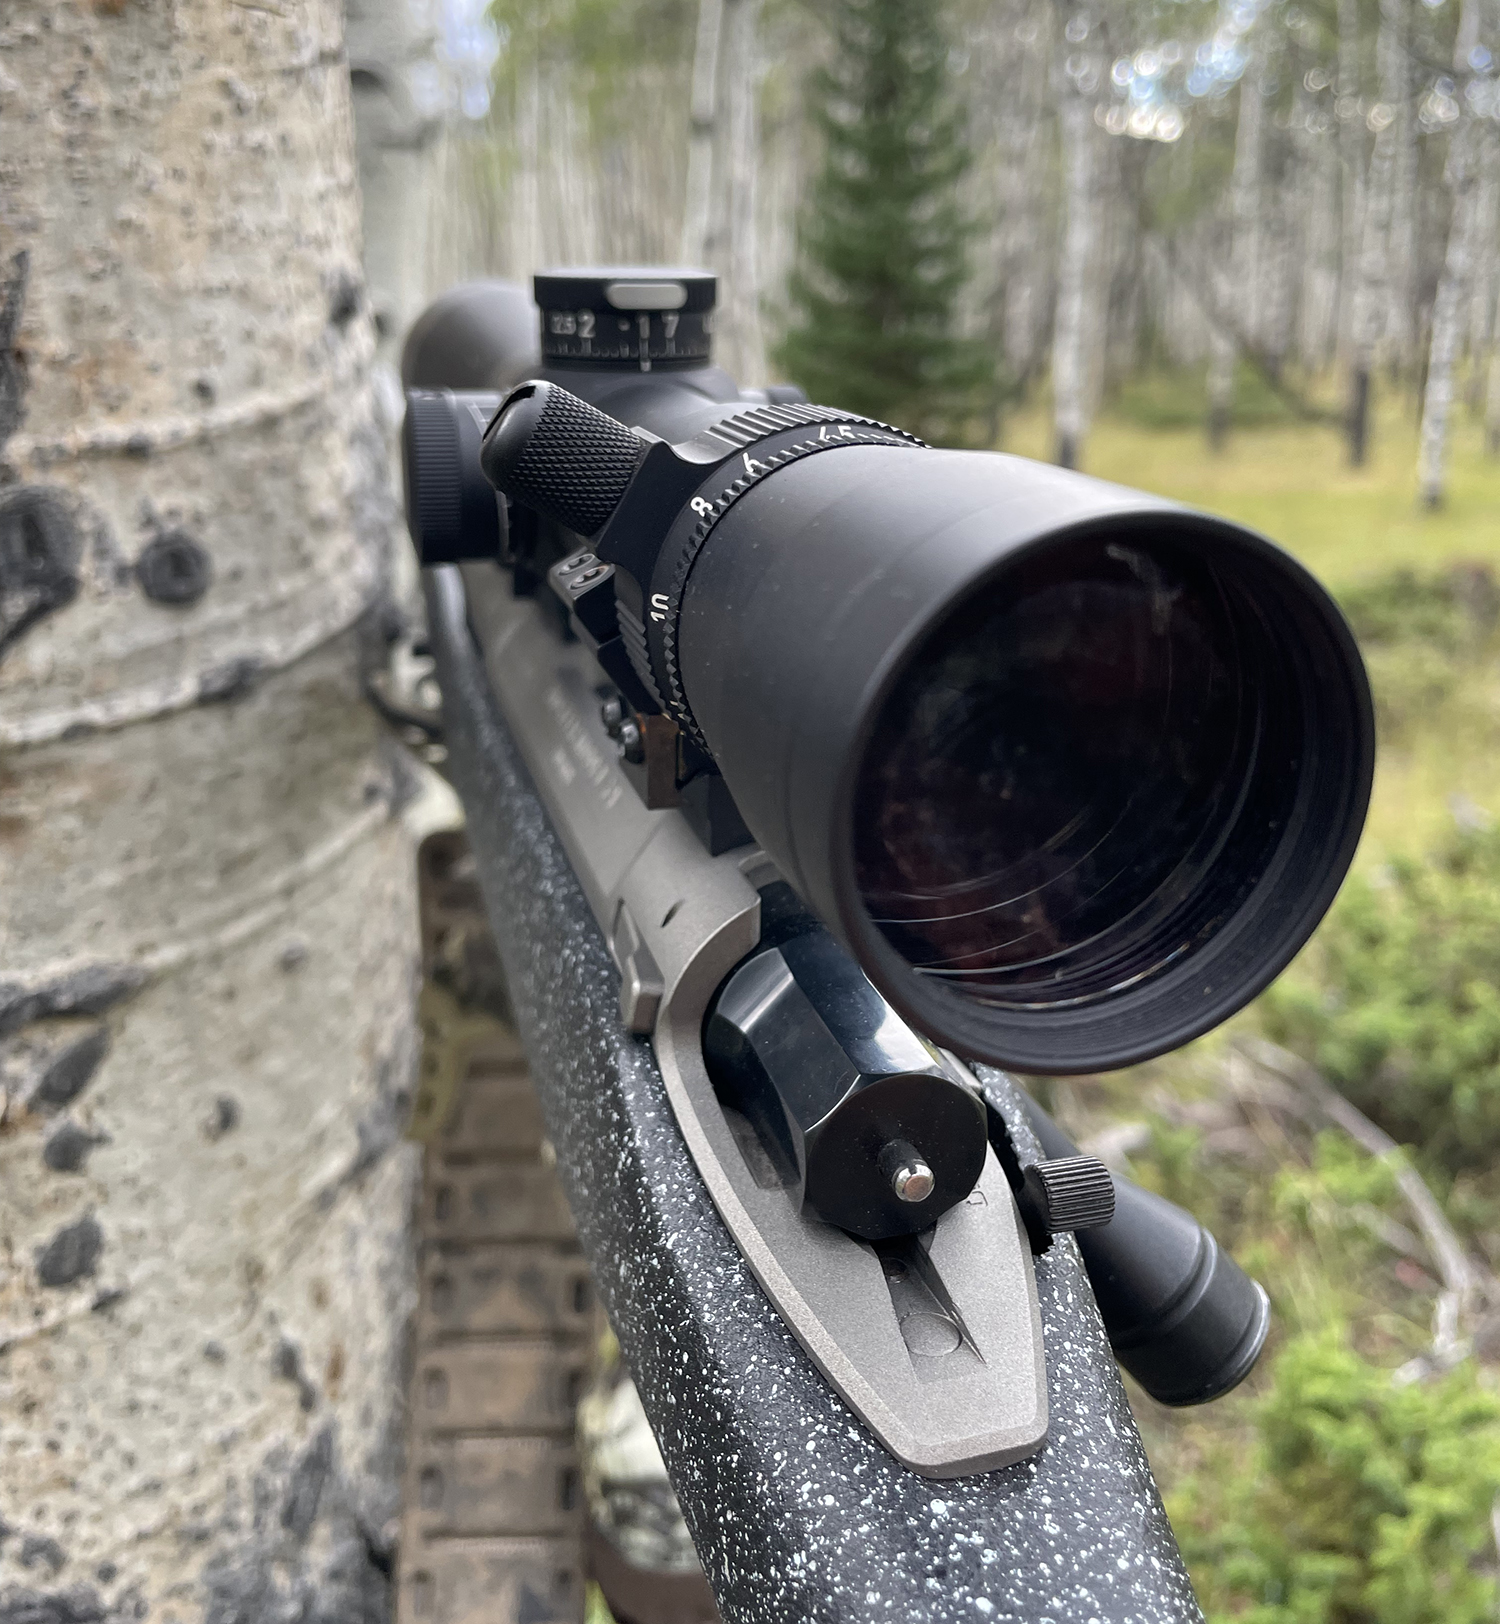 close-up of scope on rifle next to tree